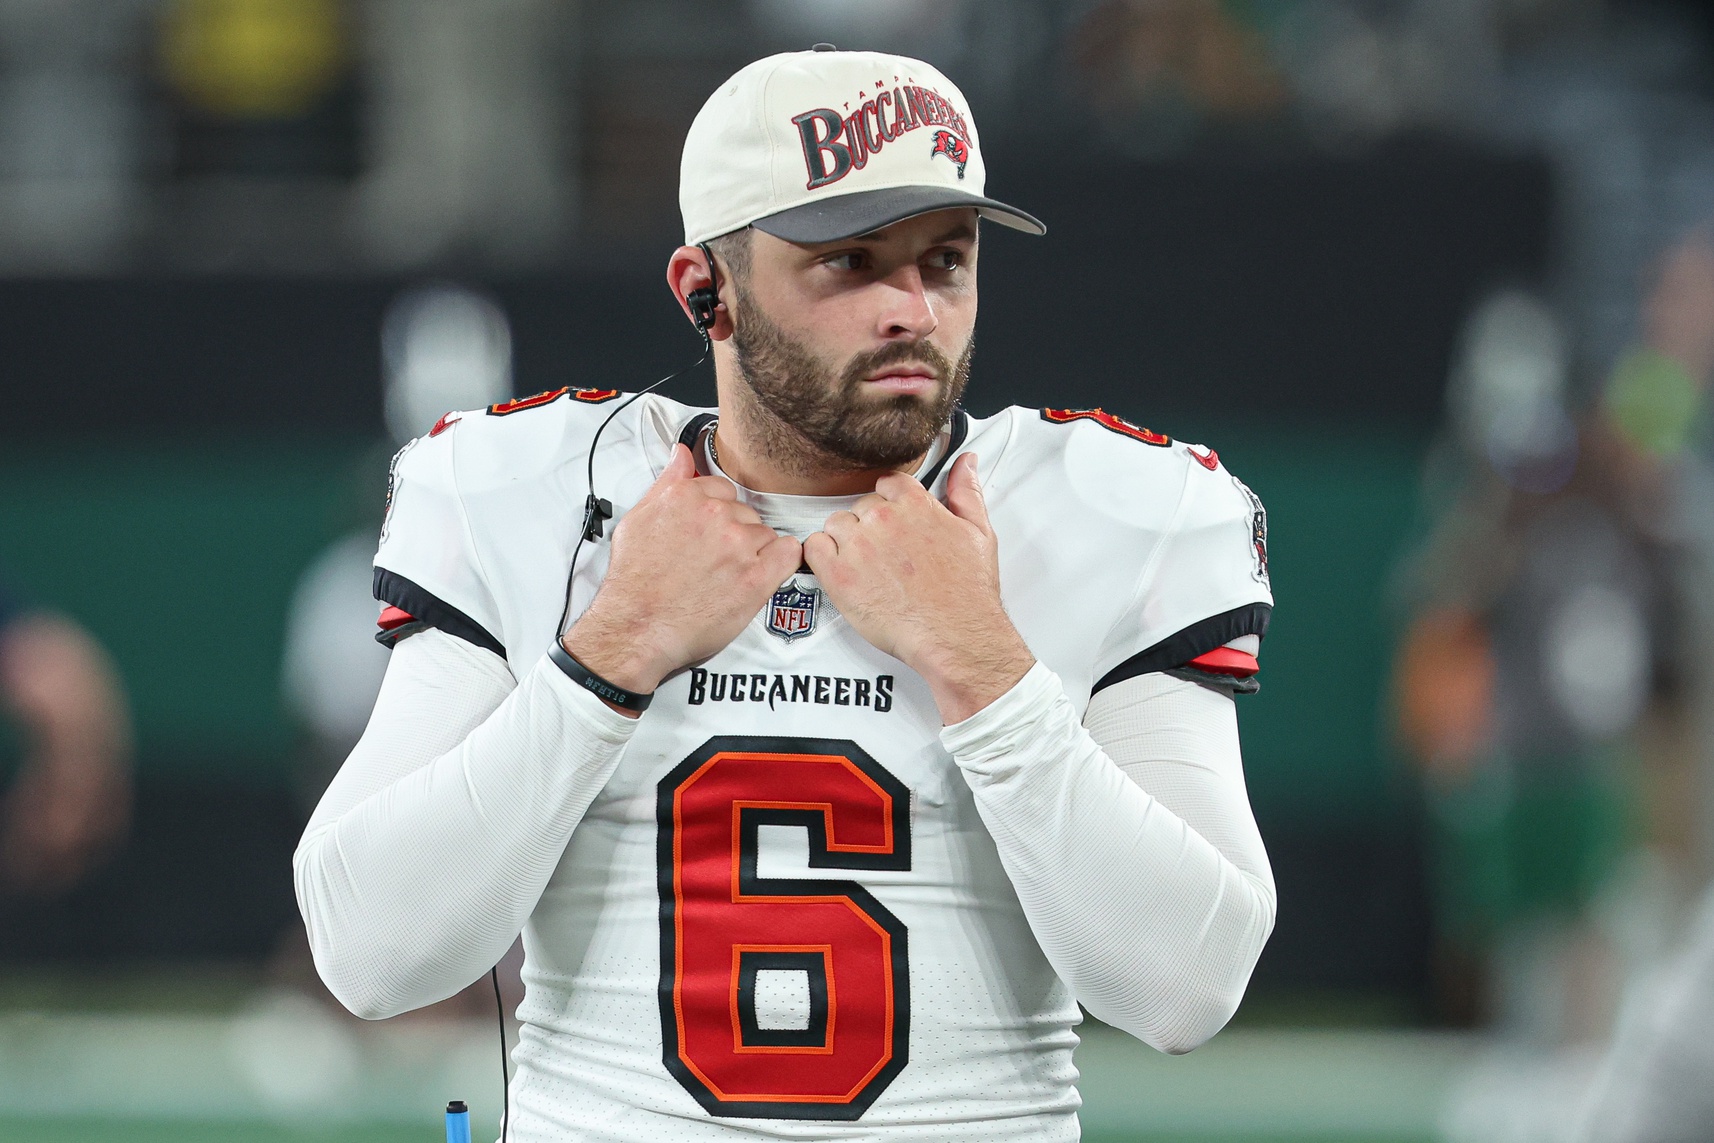 Baker Mayfield is seeking information on his funds managed by Camwood, an investment firm founded by his father James Mayfield.